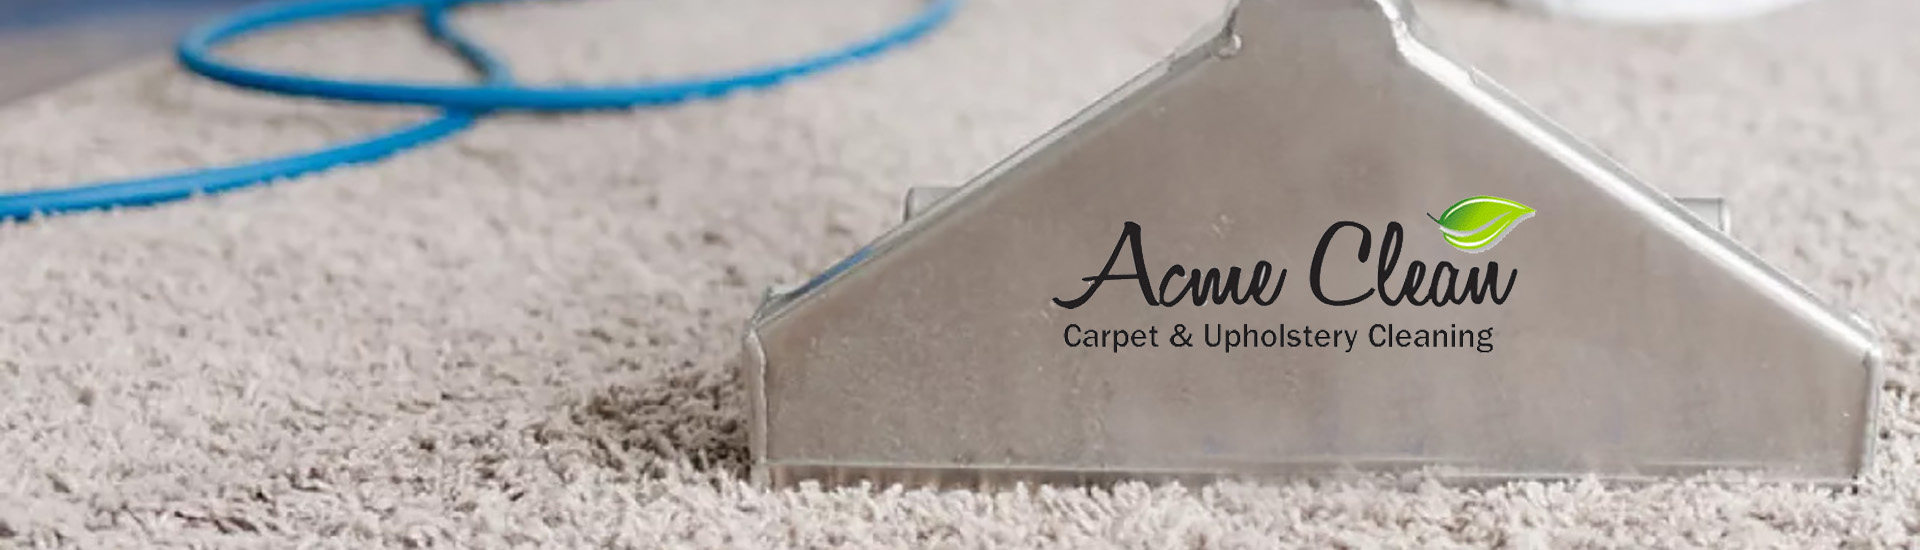 golden carpet cleaning company